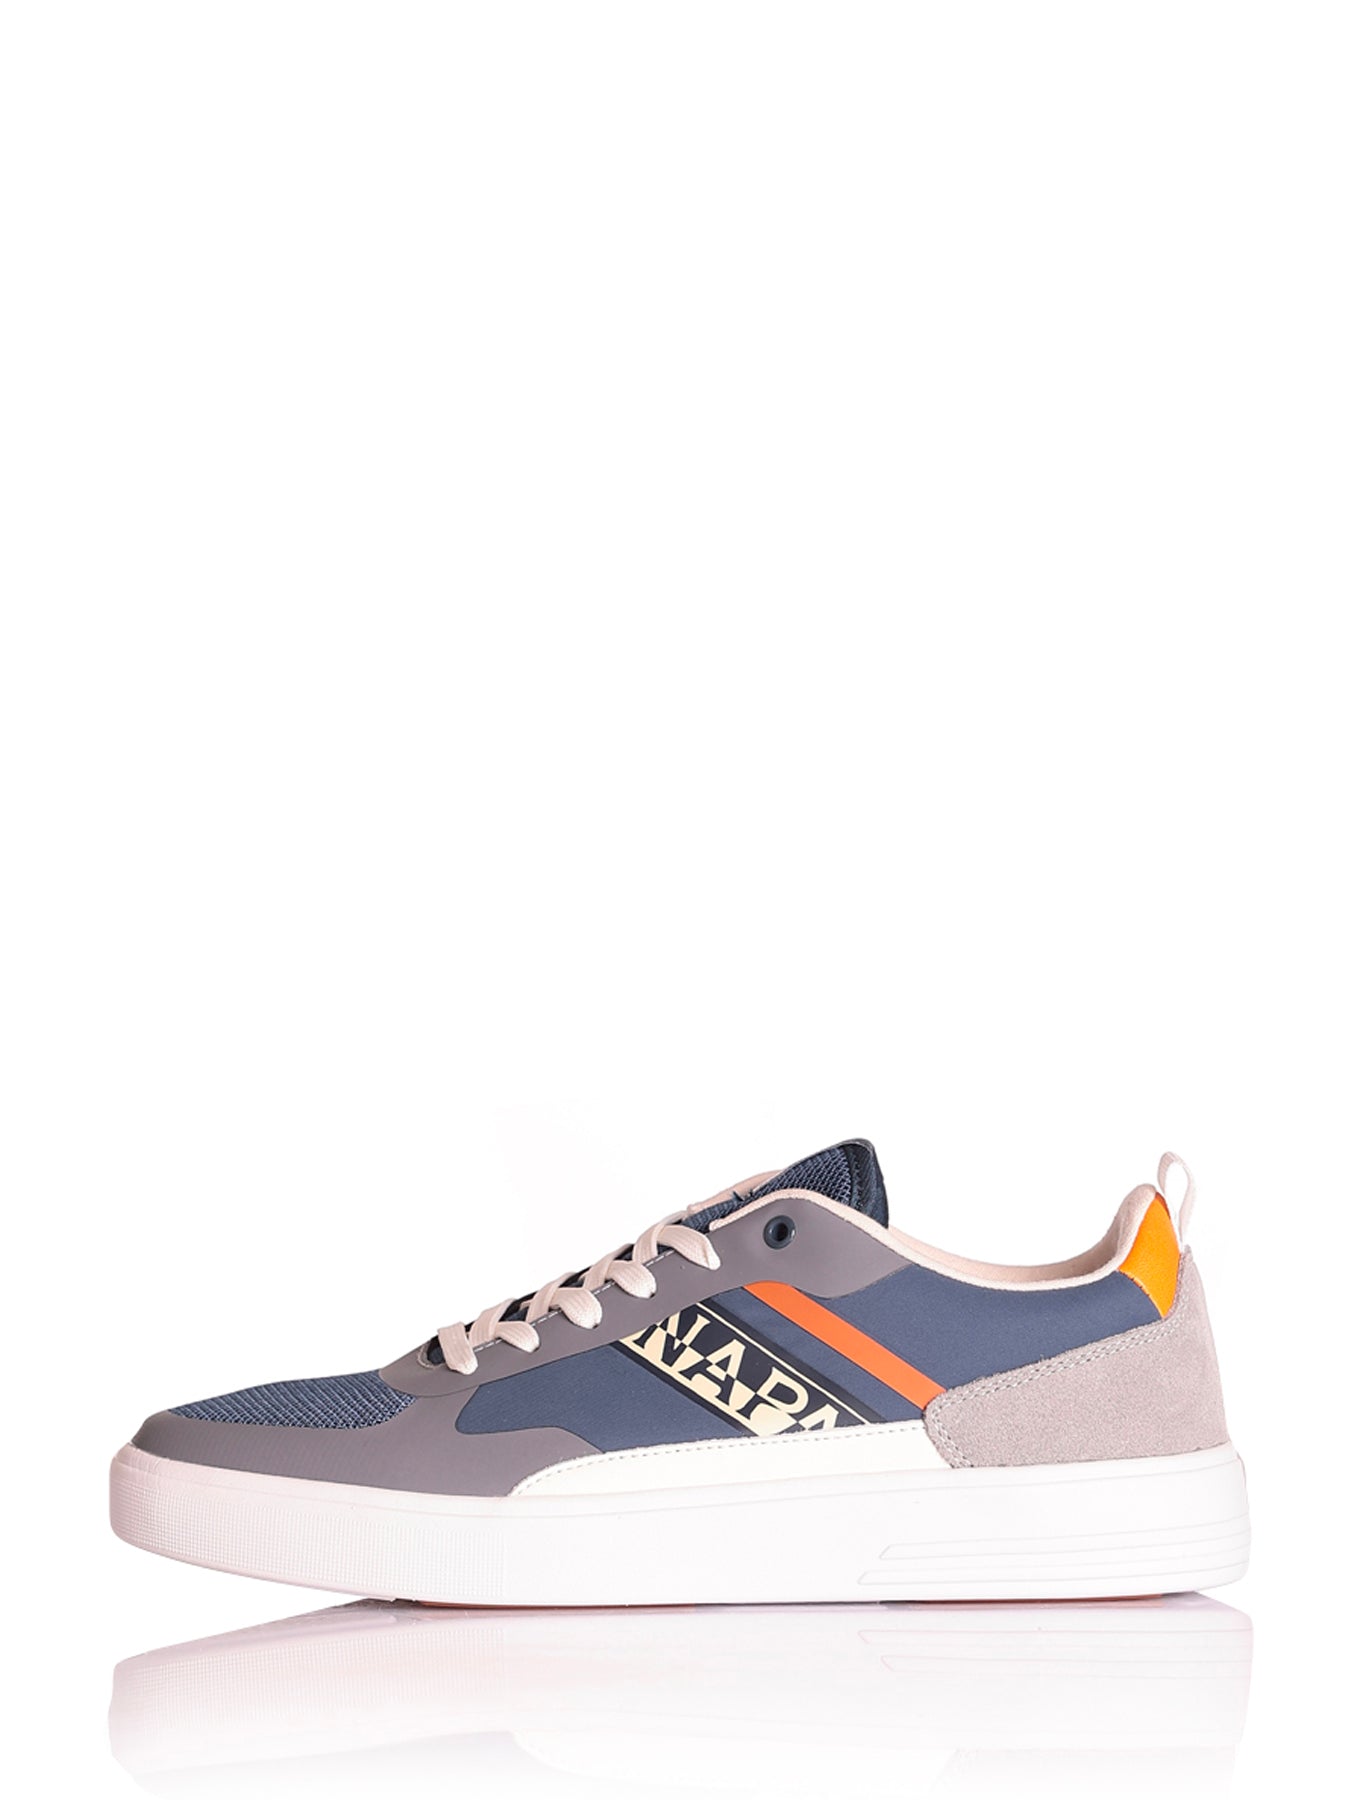 Sneakers Np0a4hkr Navy/grey